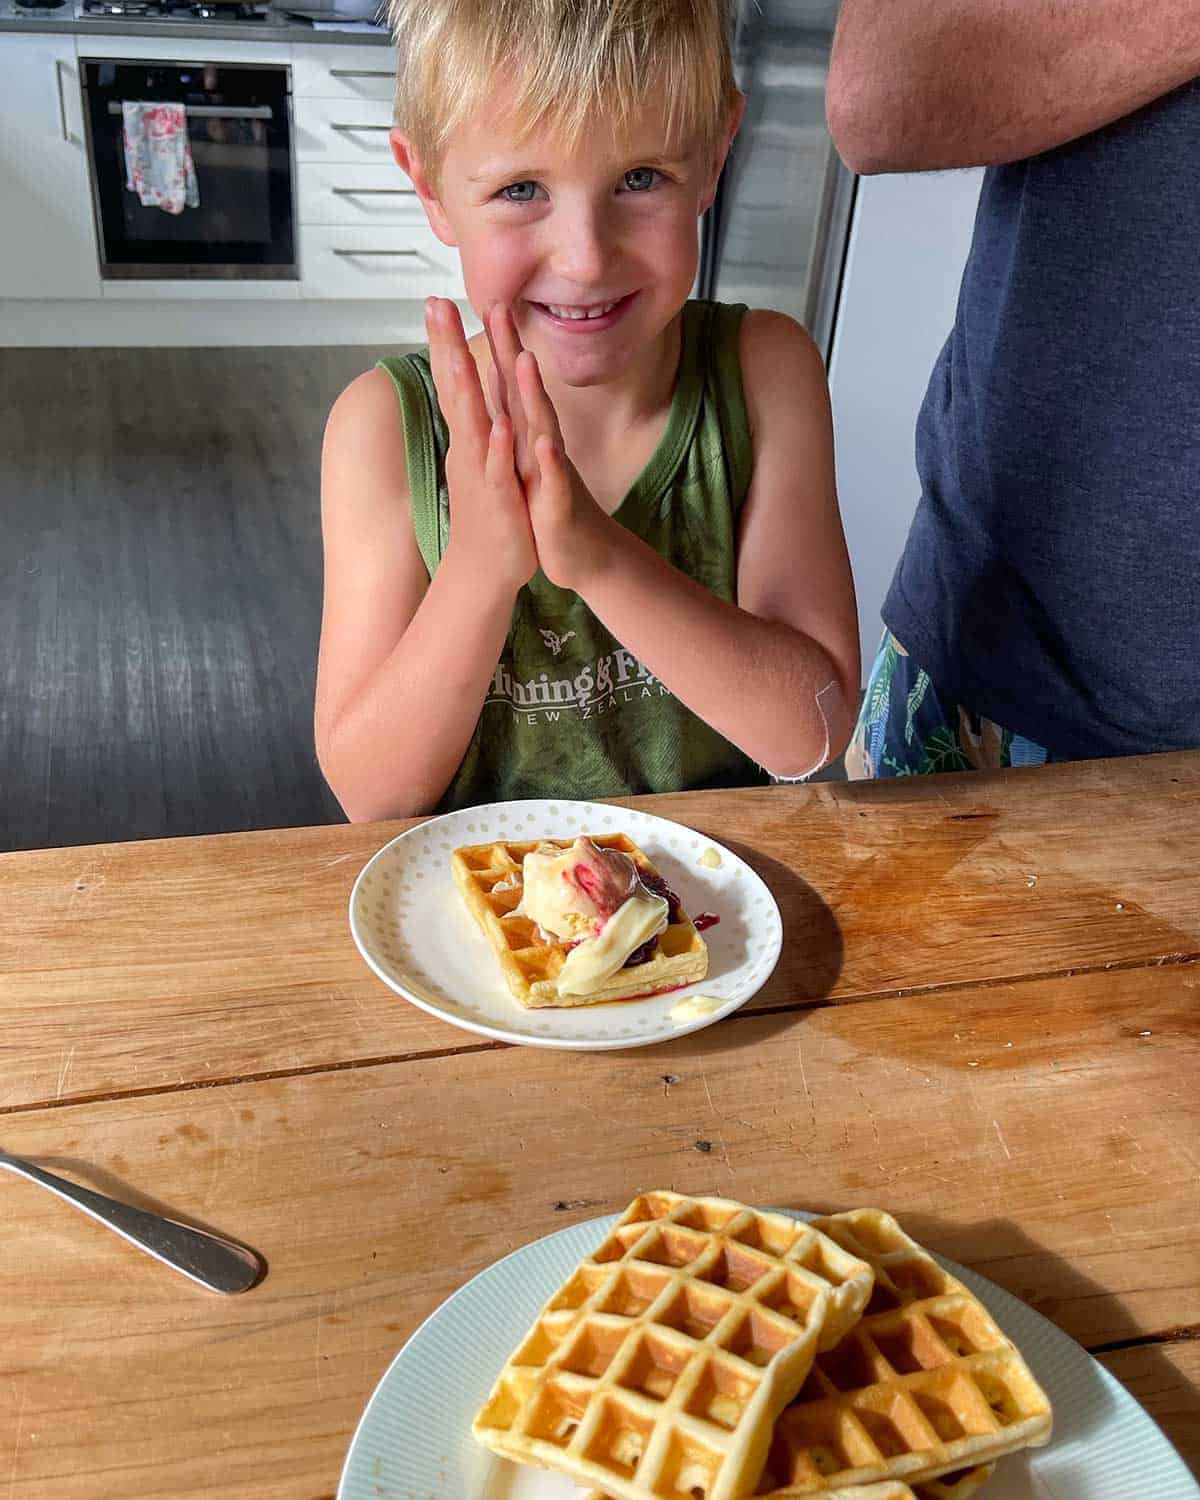 A smiling young boy sitting at a wooden table with a plate of waffles in front of him.